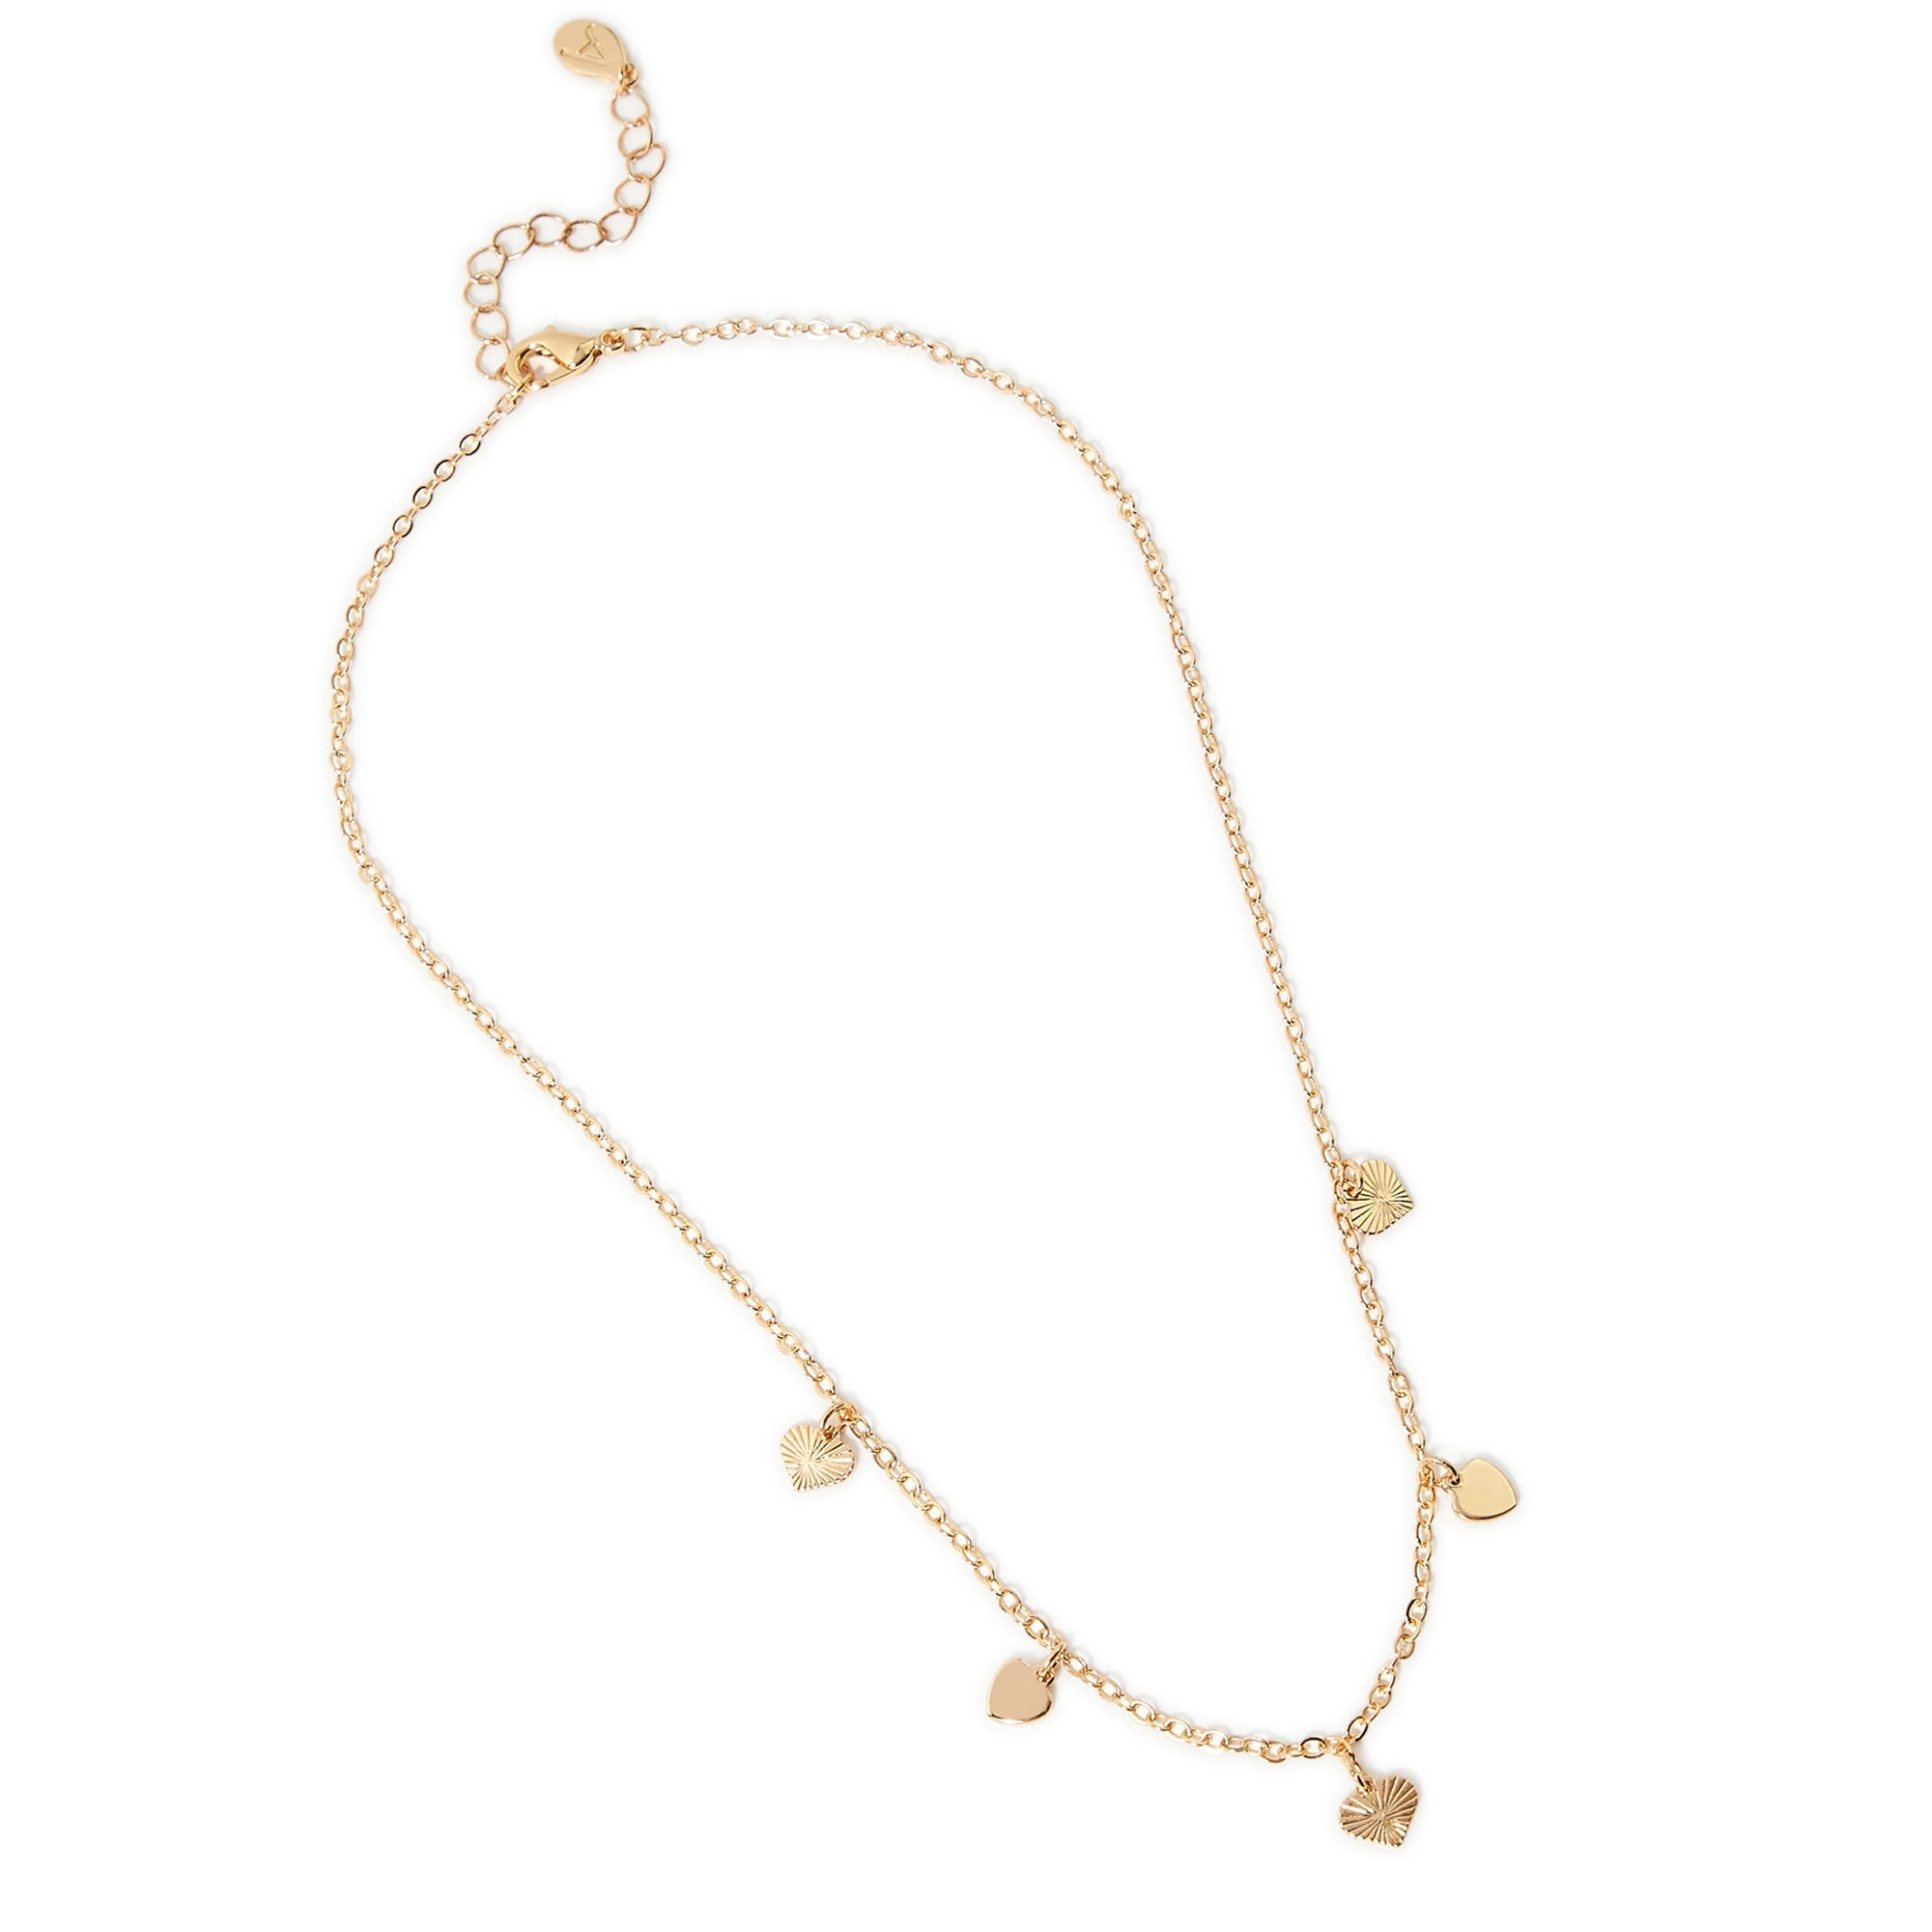 Accessorize London Women's Gold Heart Station Necklace